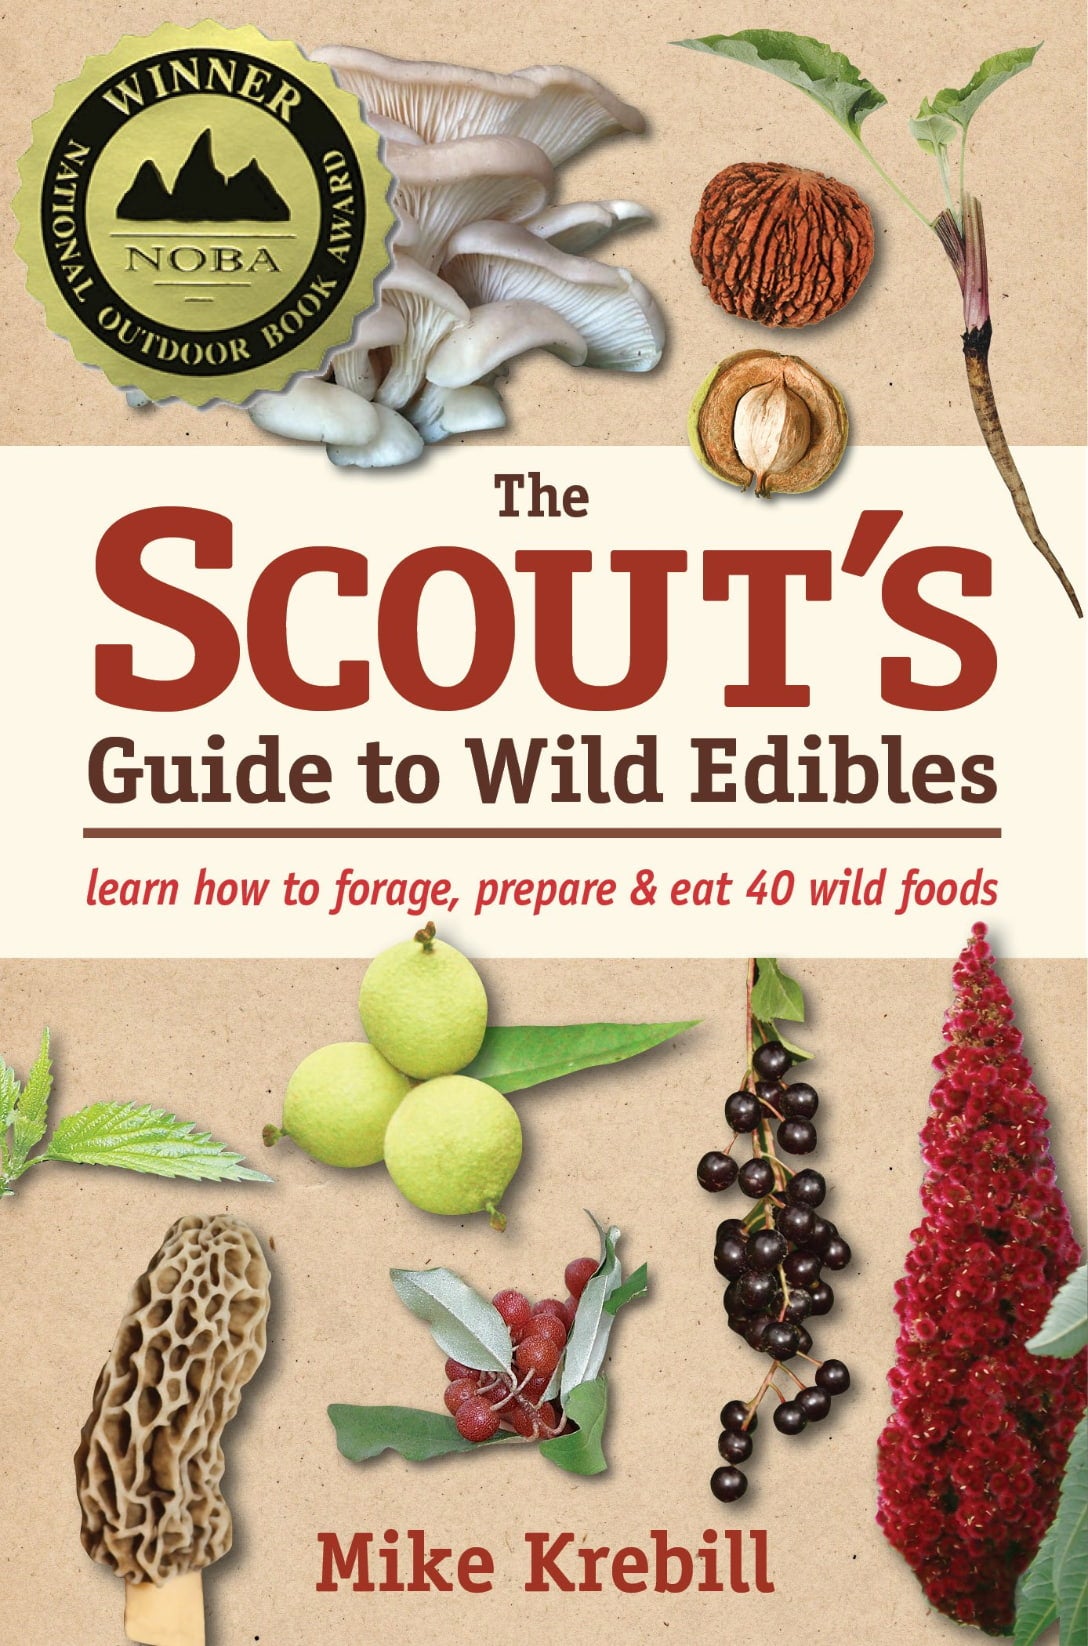 foraged food on the cover of a book